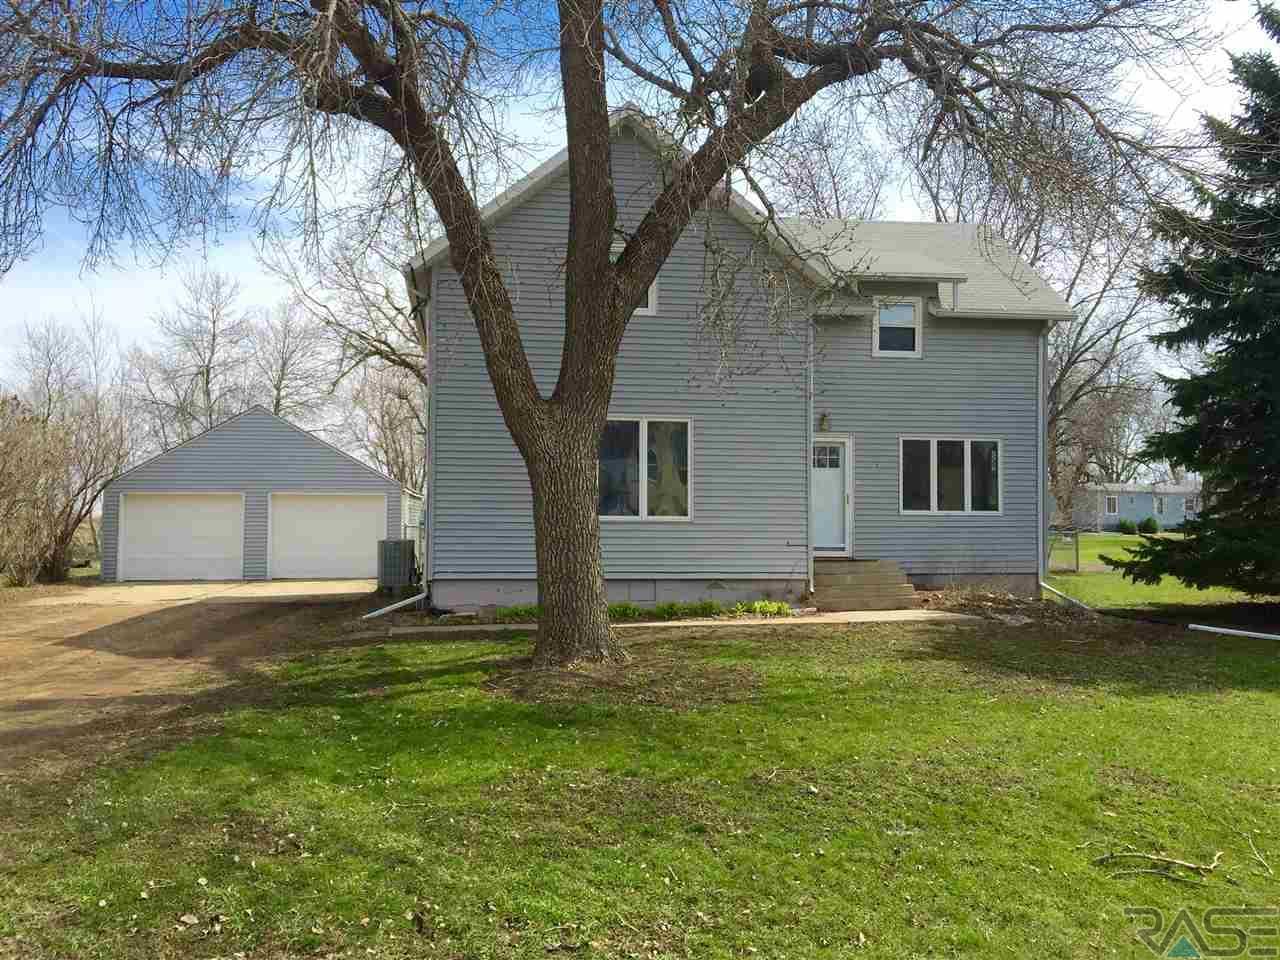 Chris Popkes Broker / Owner EXIT Realty Sioux Empire.  Another home listed and under contract!